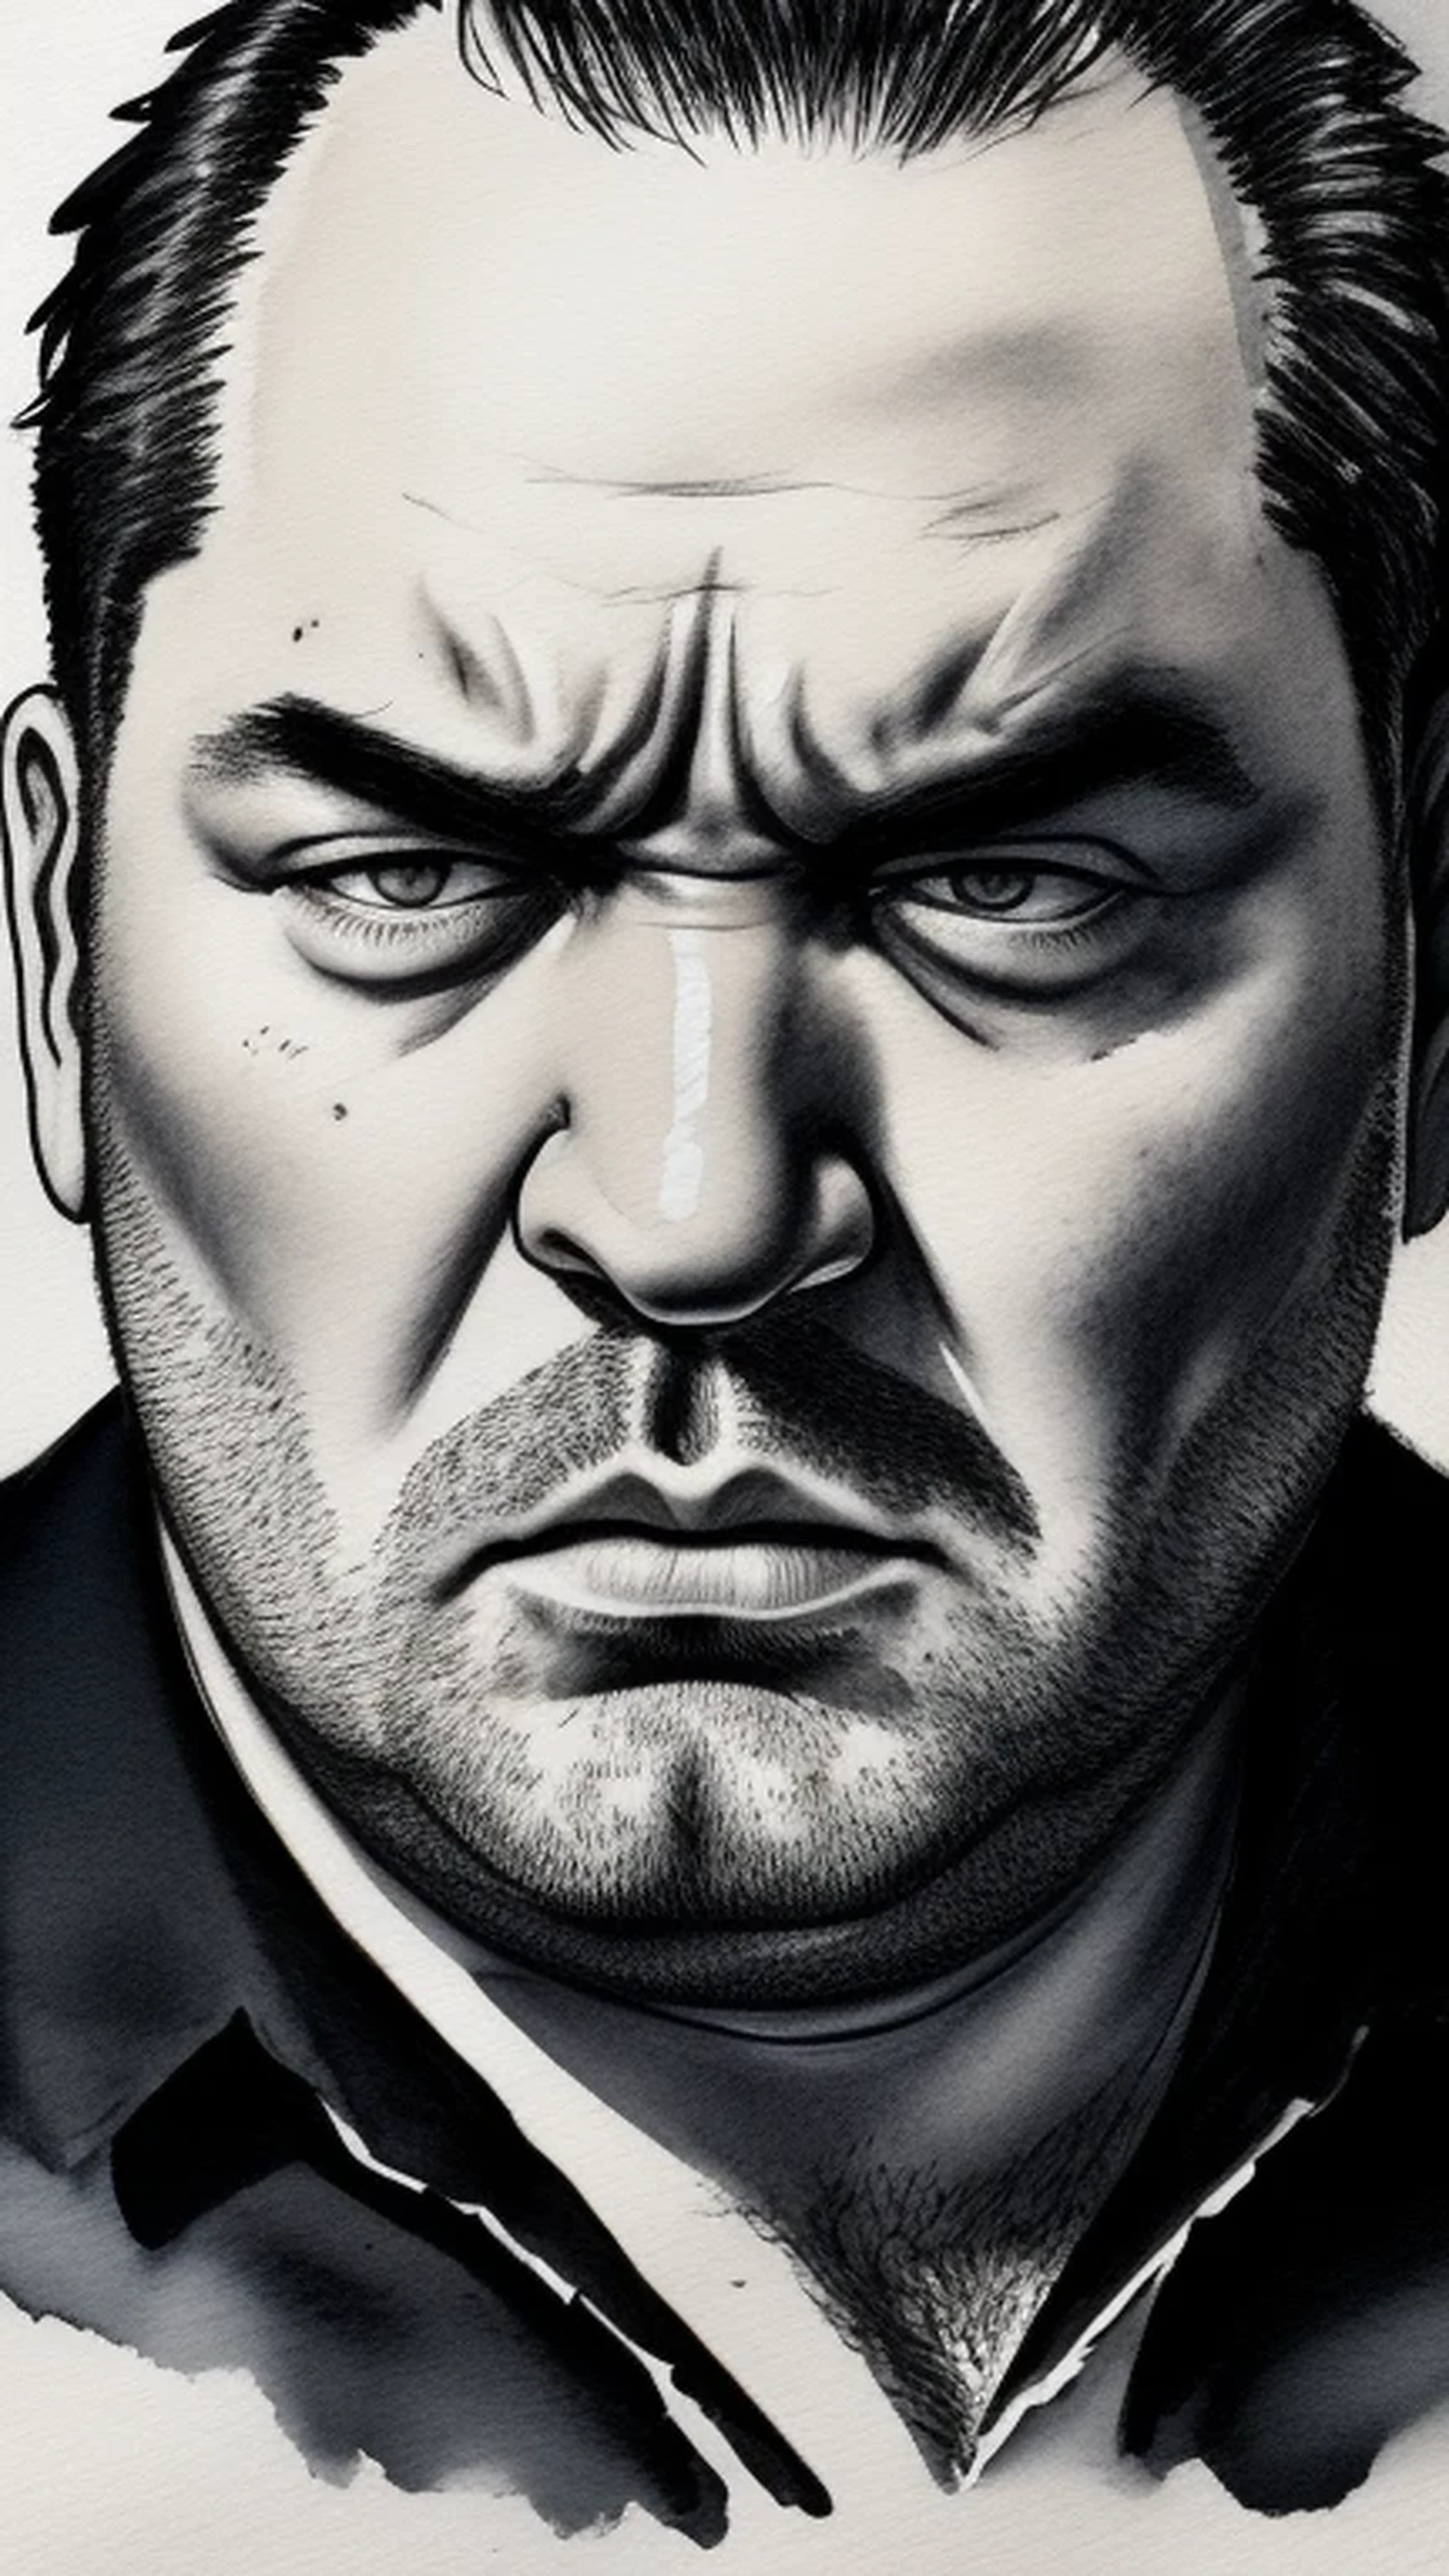 Angry chubby man close-up portrait, Figu...